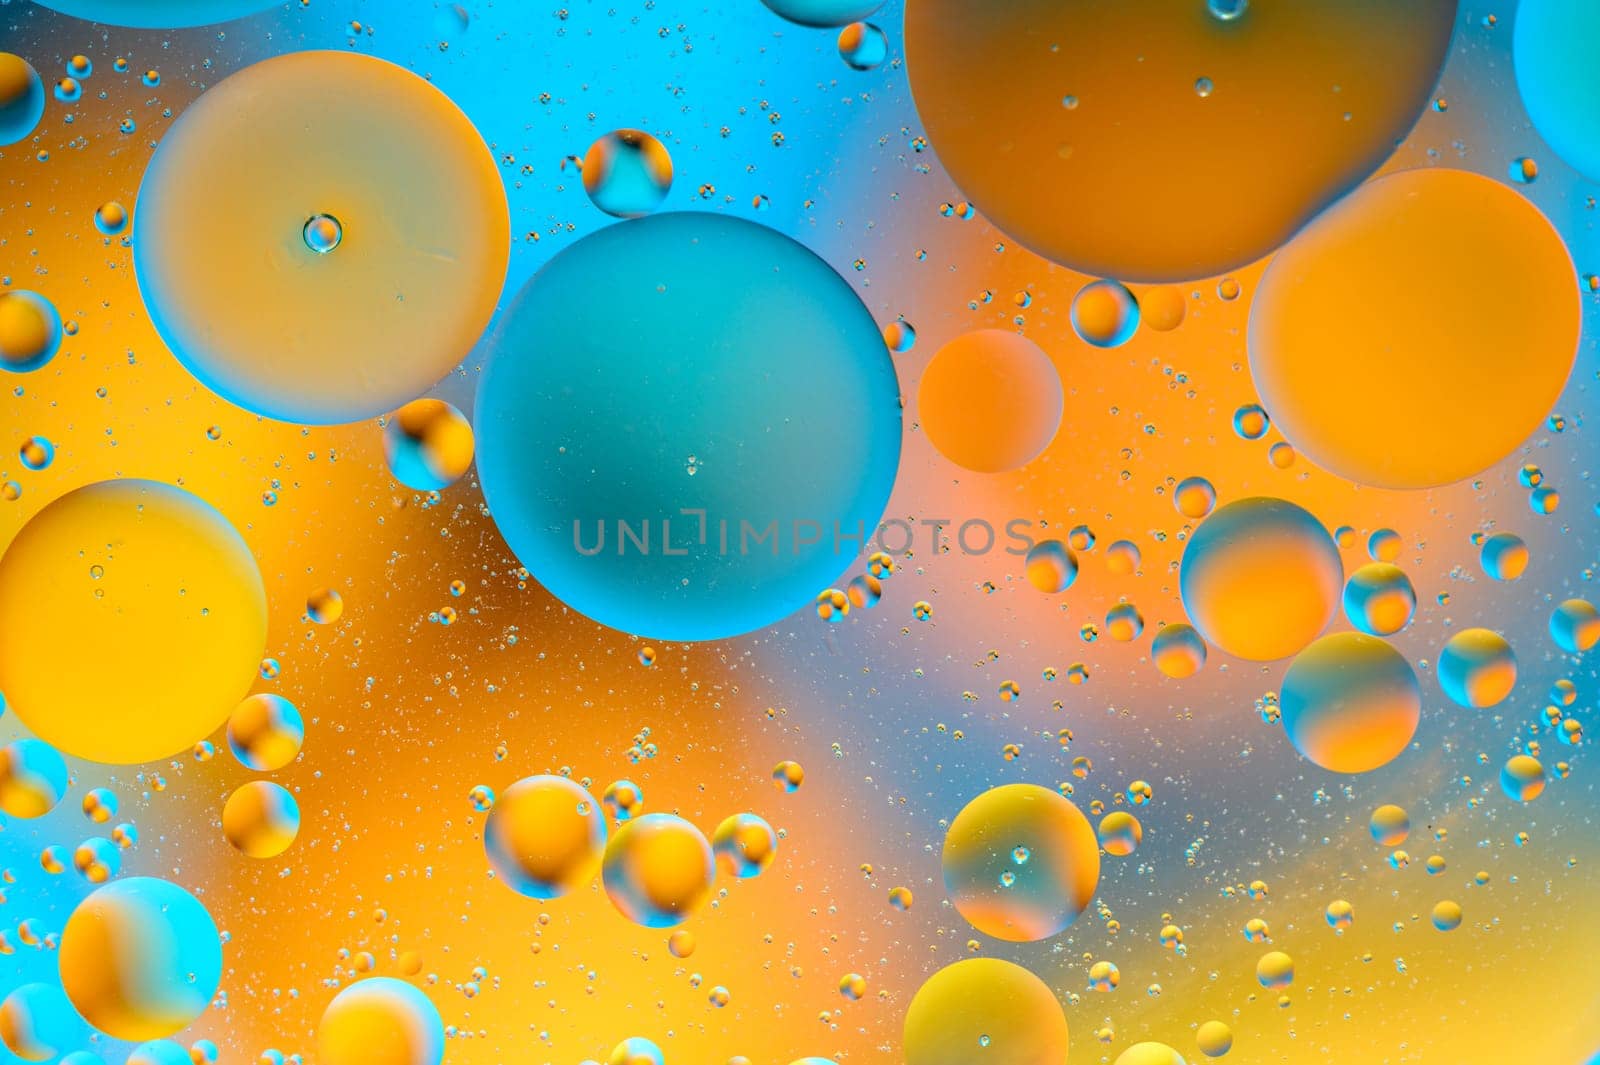 abstract background of multi-colored spots and circles microcosm universe galaxy 16 by Mixa74